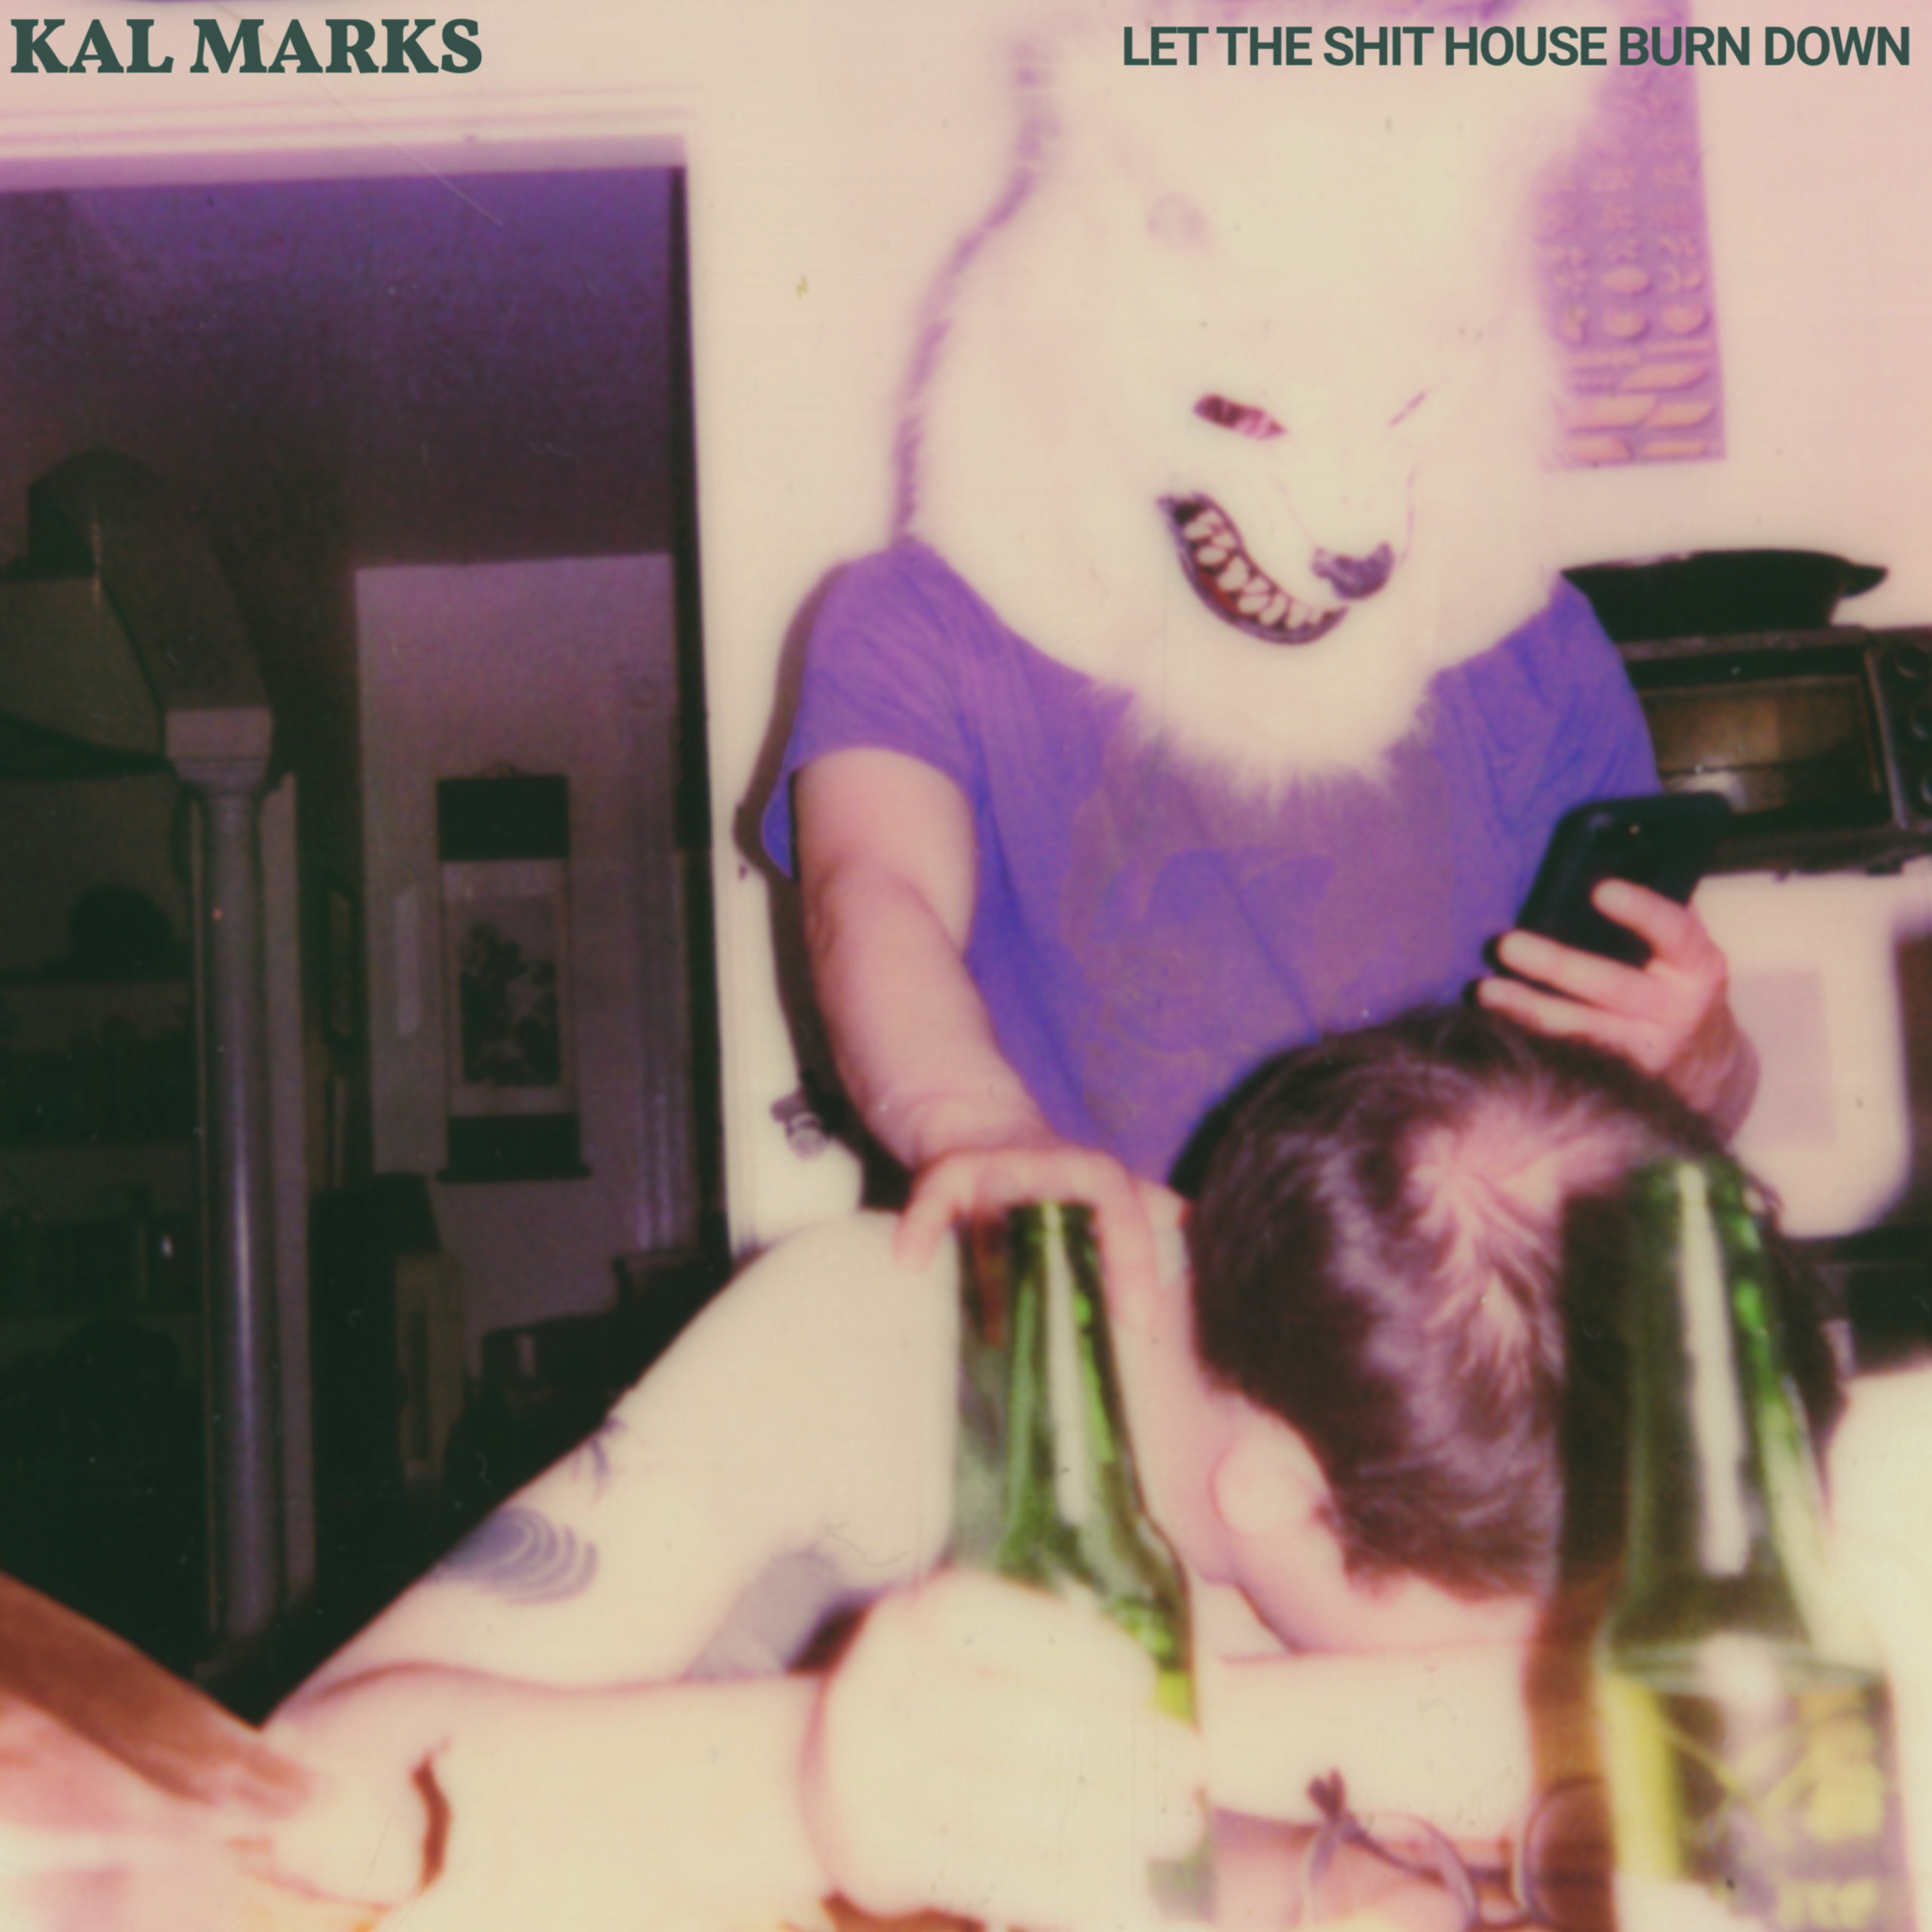 Kal Marks’ ‘Let The Shit House Burn Down’ EP is out today via Exploding in Sound Records